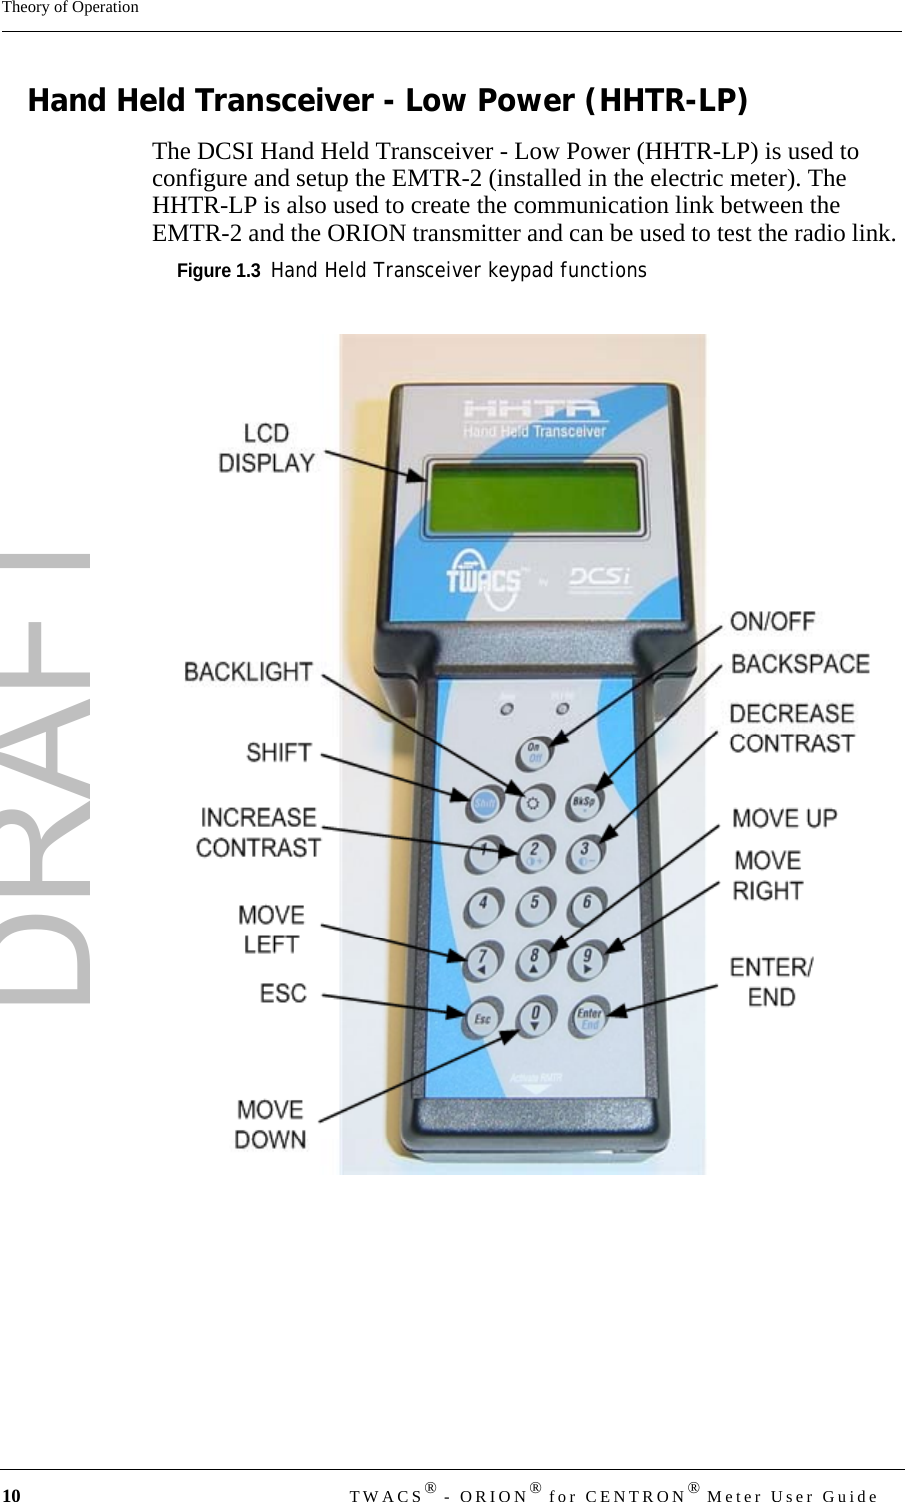 DRAFT10 TWACS® - ORION® for CENTRON® Meter User GuideTheory of OperationHand Held Transceiver - Low Power (HHTR-LP)The DCSI Hand Held Transceiver - Low Power (HHTR-LP) is used to configure and setup the EMTR-2 (installed in the electric meter). The HHTR-LP is also used to create the communication link between the EMTR-2 and the ORION transmitter and can be used to test the radio link. Figure 1.3  Hand Held Transceiver keypad functions